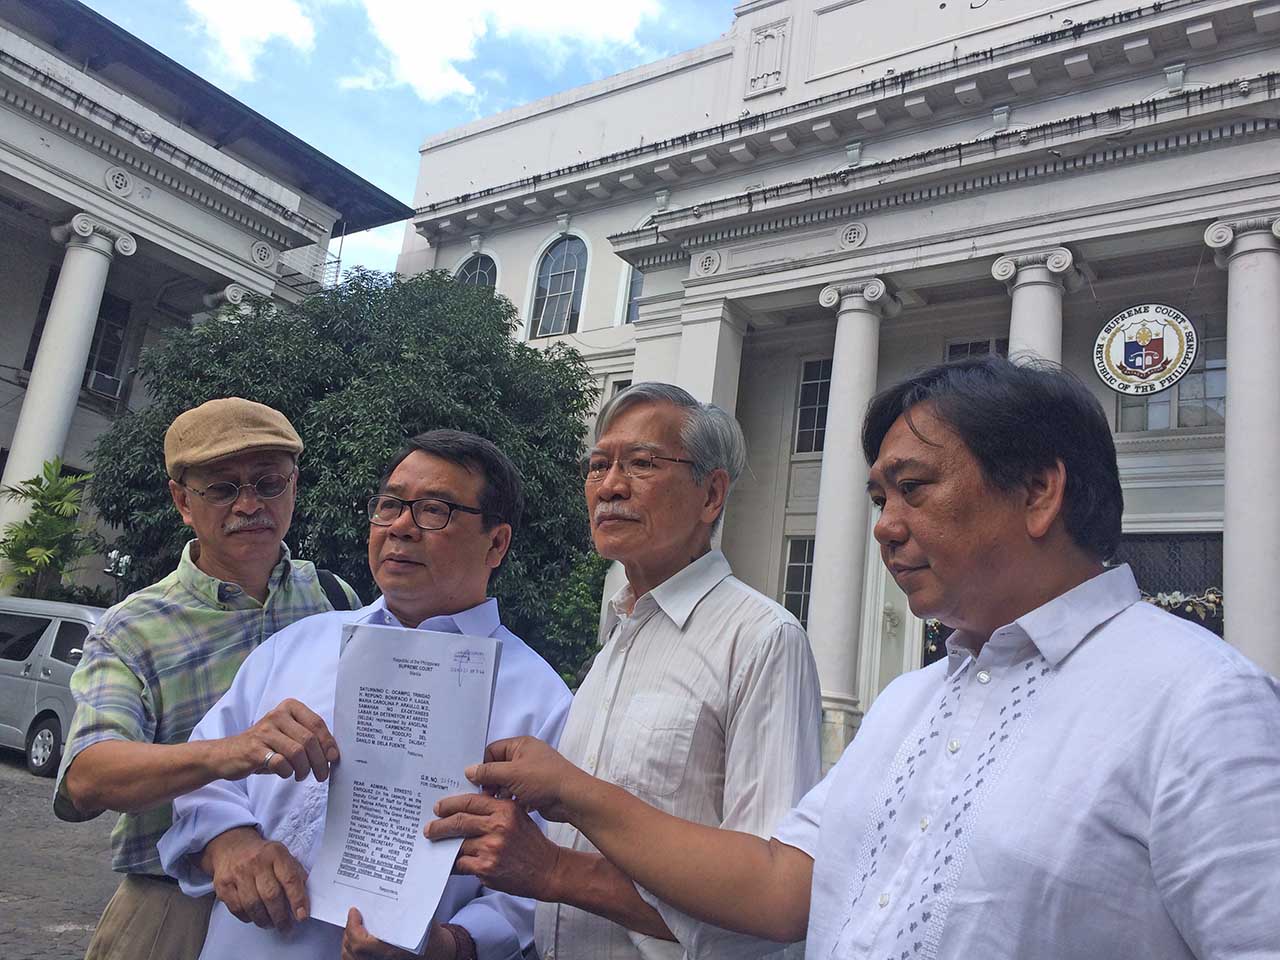 LEGAL ACTION. The petitioners want the Supreme Court to cite the Marcos family, officials from the Armed Forces of the Philippines, and officials from the Department of National Defense in contempt. Photo by Patty Pasion/Rappler 